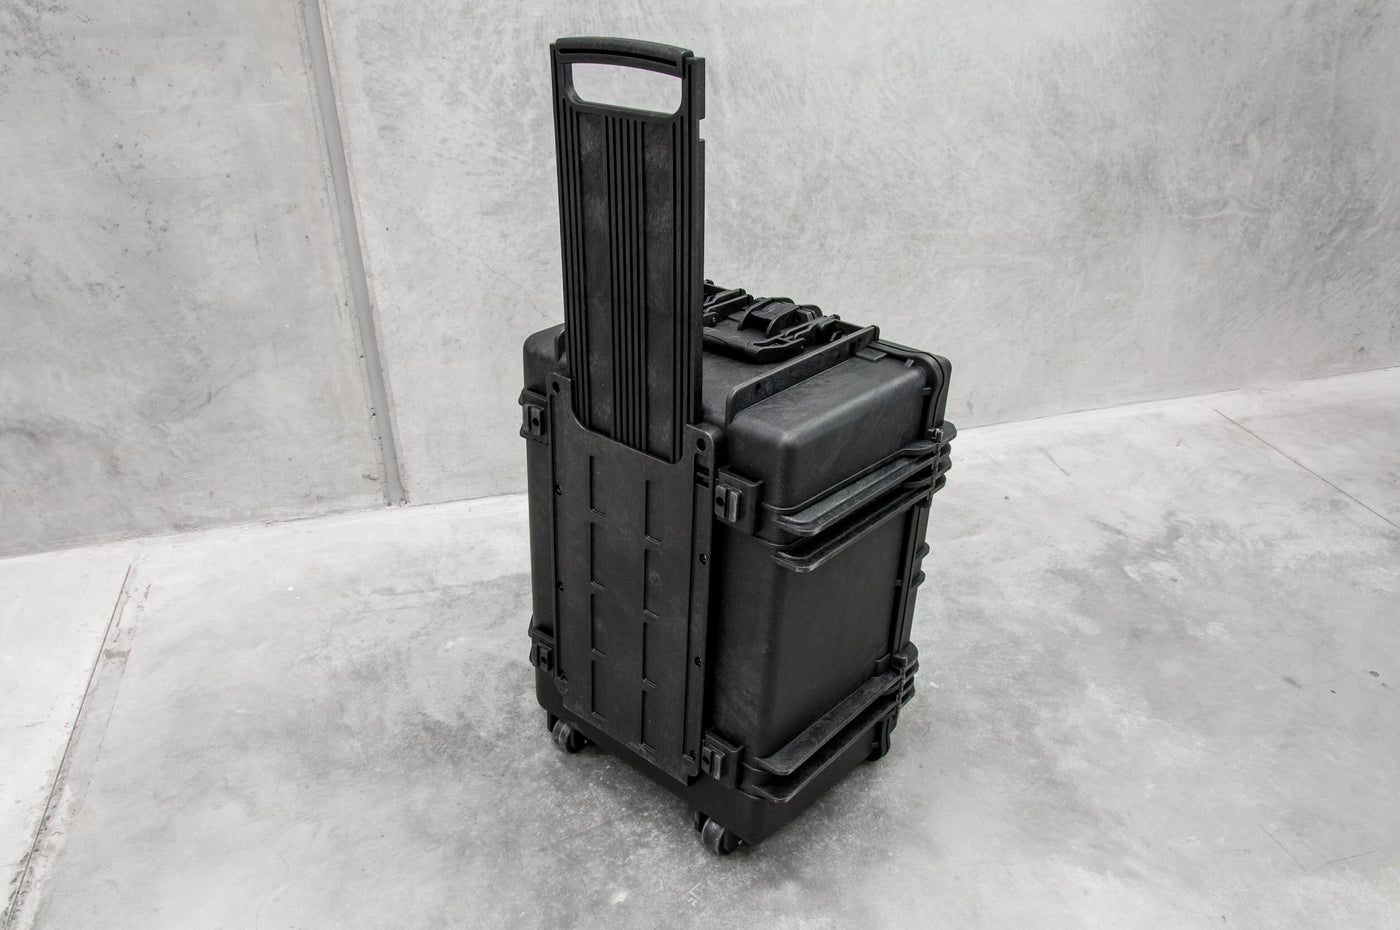 6U Flayrack in Polyproof protective case